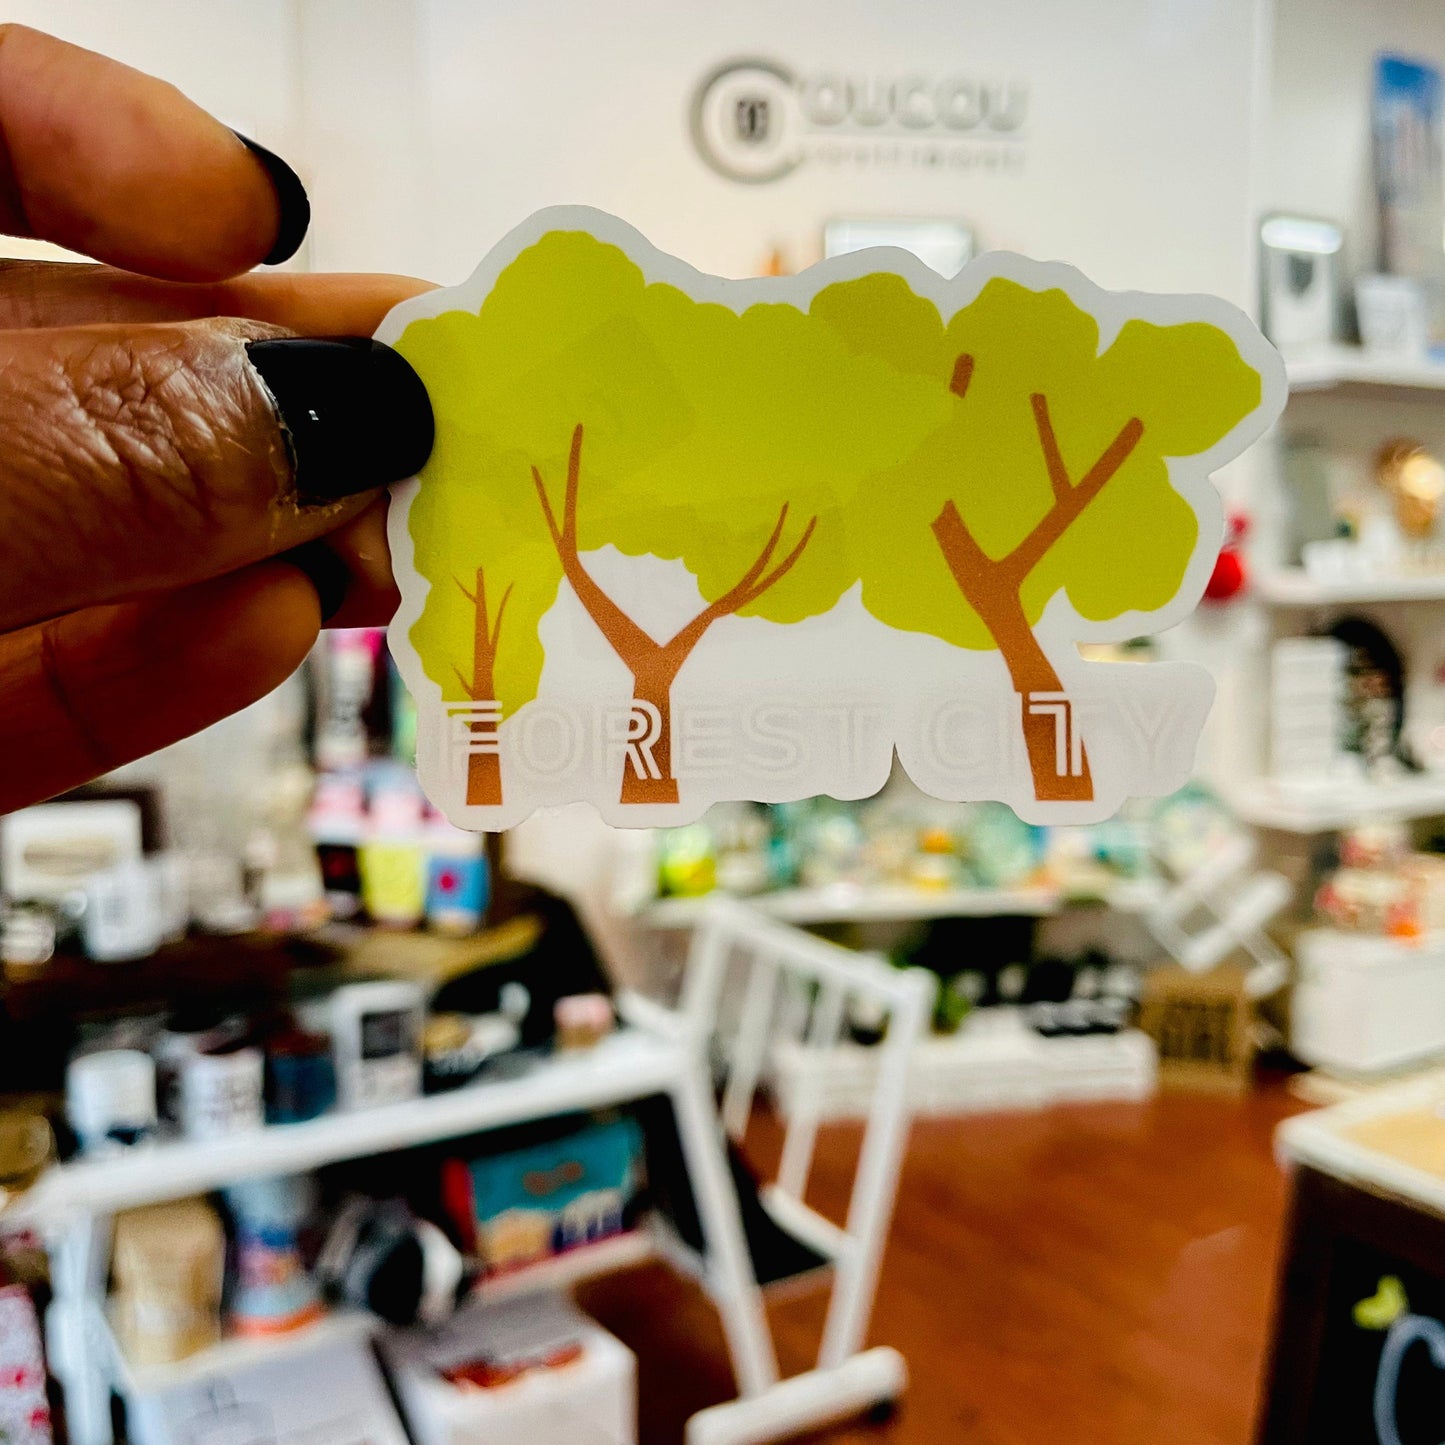 Forest City Trees Sticker